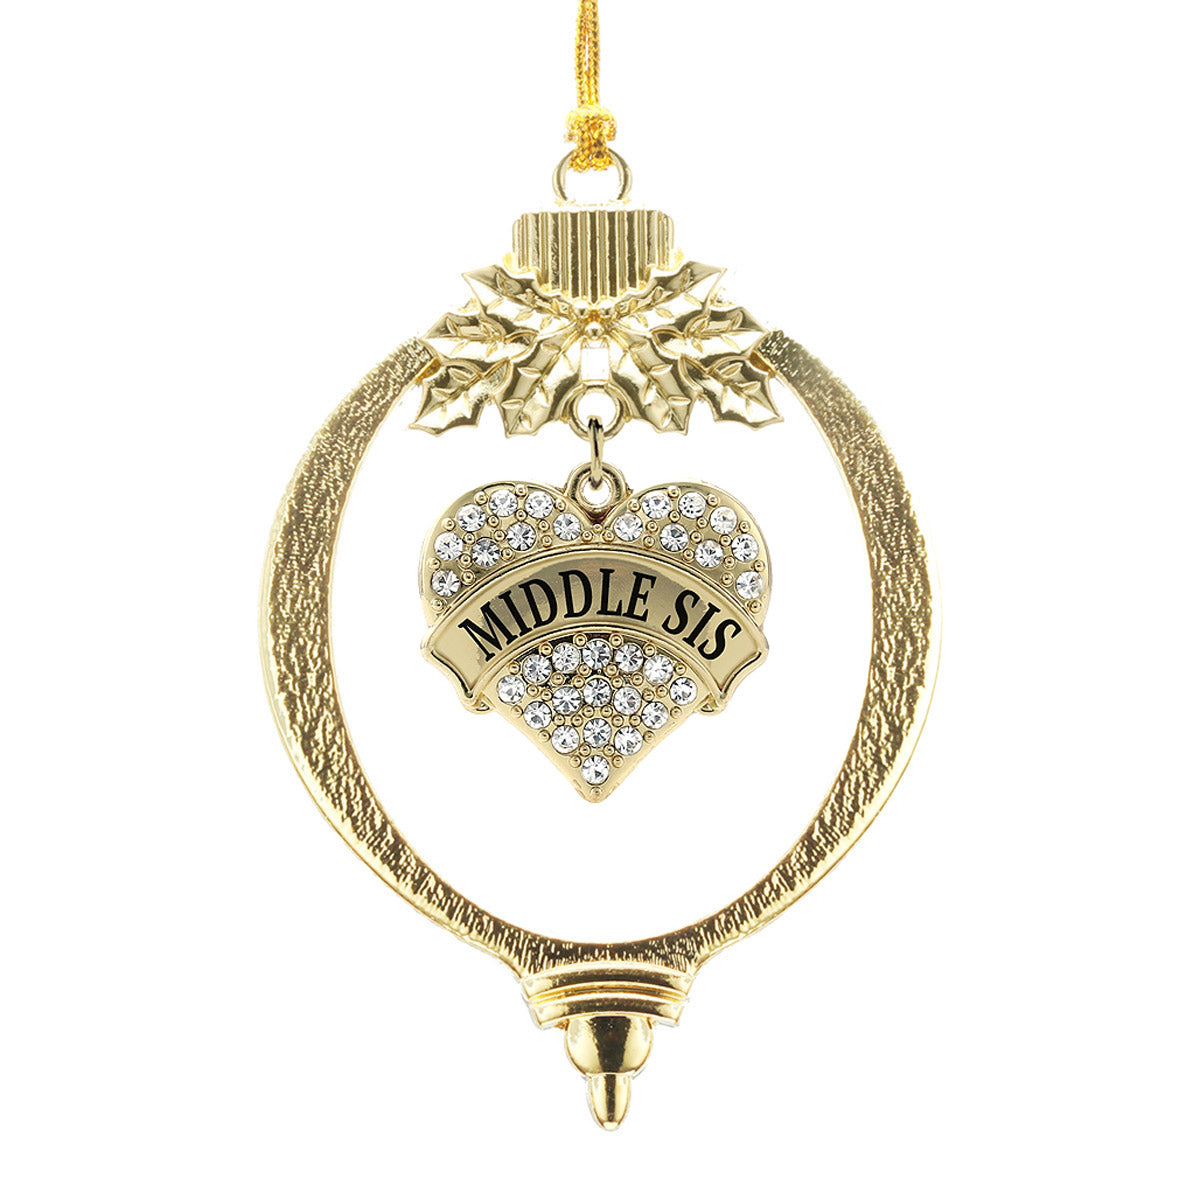 Gold Middle Sis Pave Heart Charm Holiday Ornament